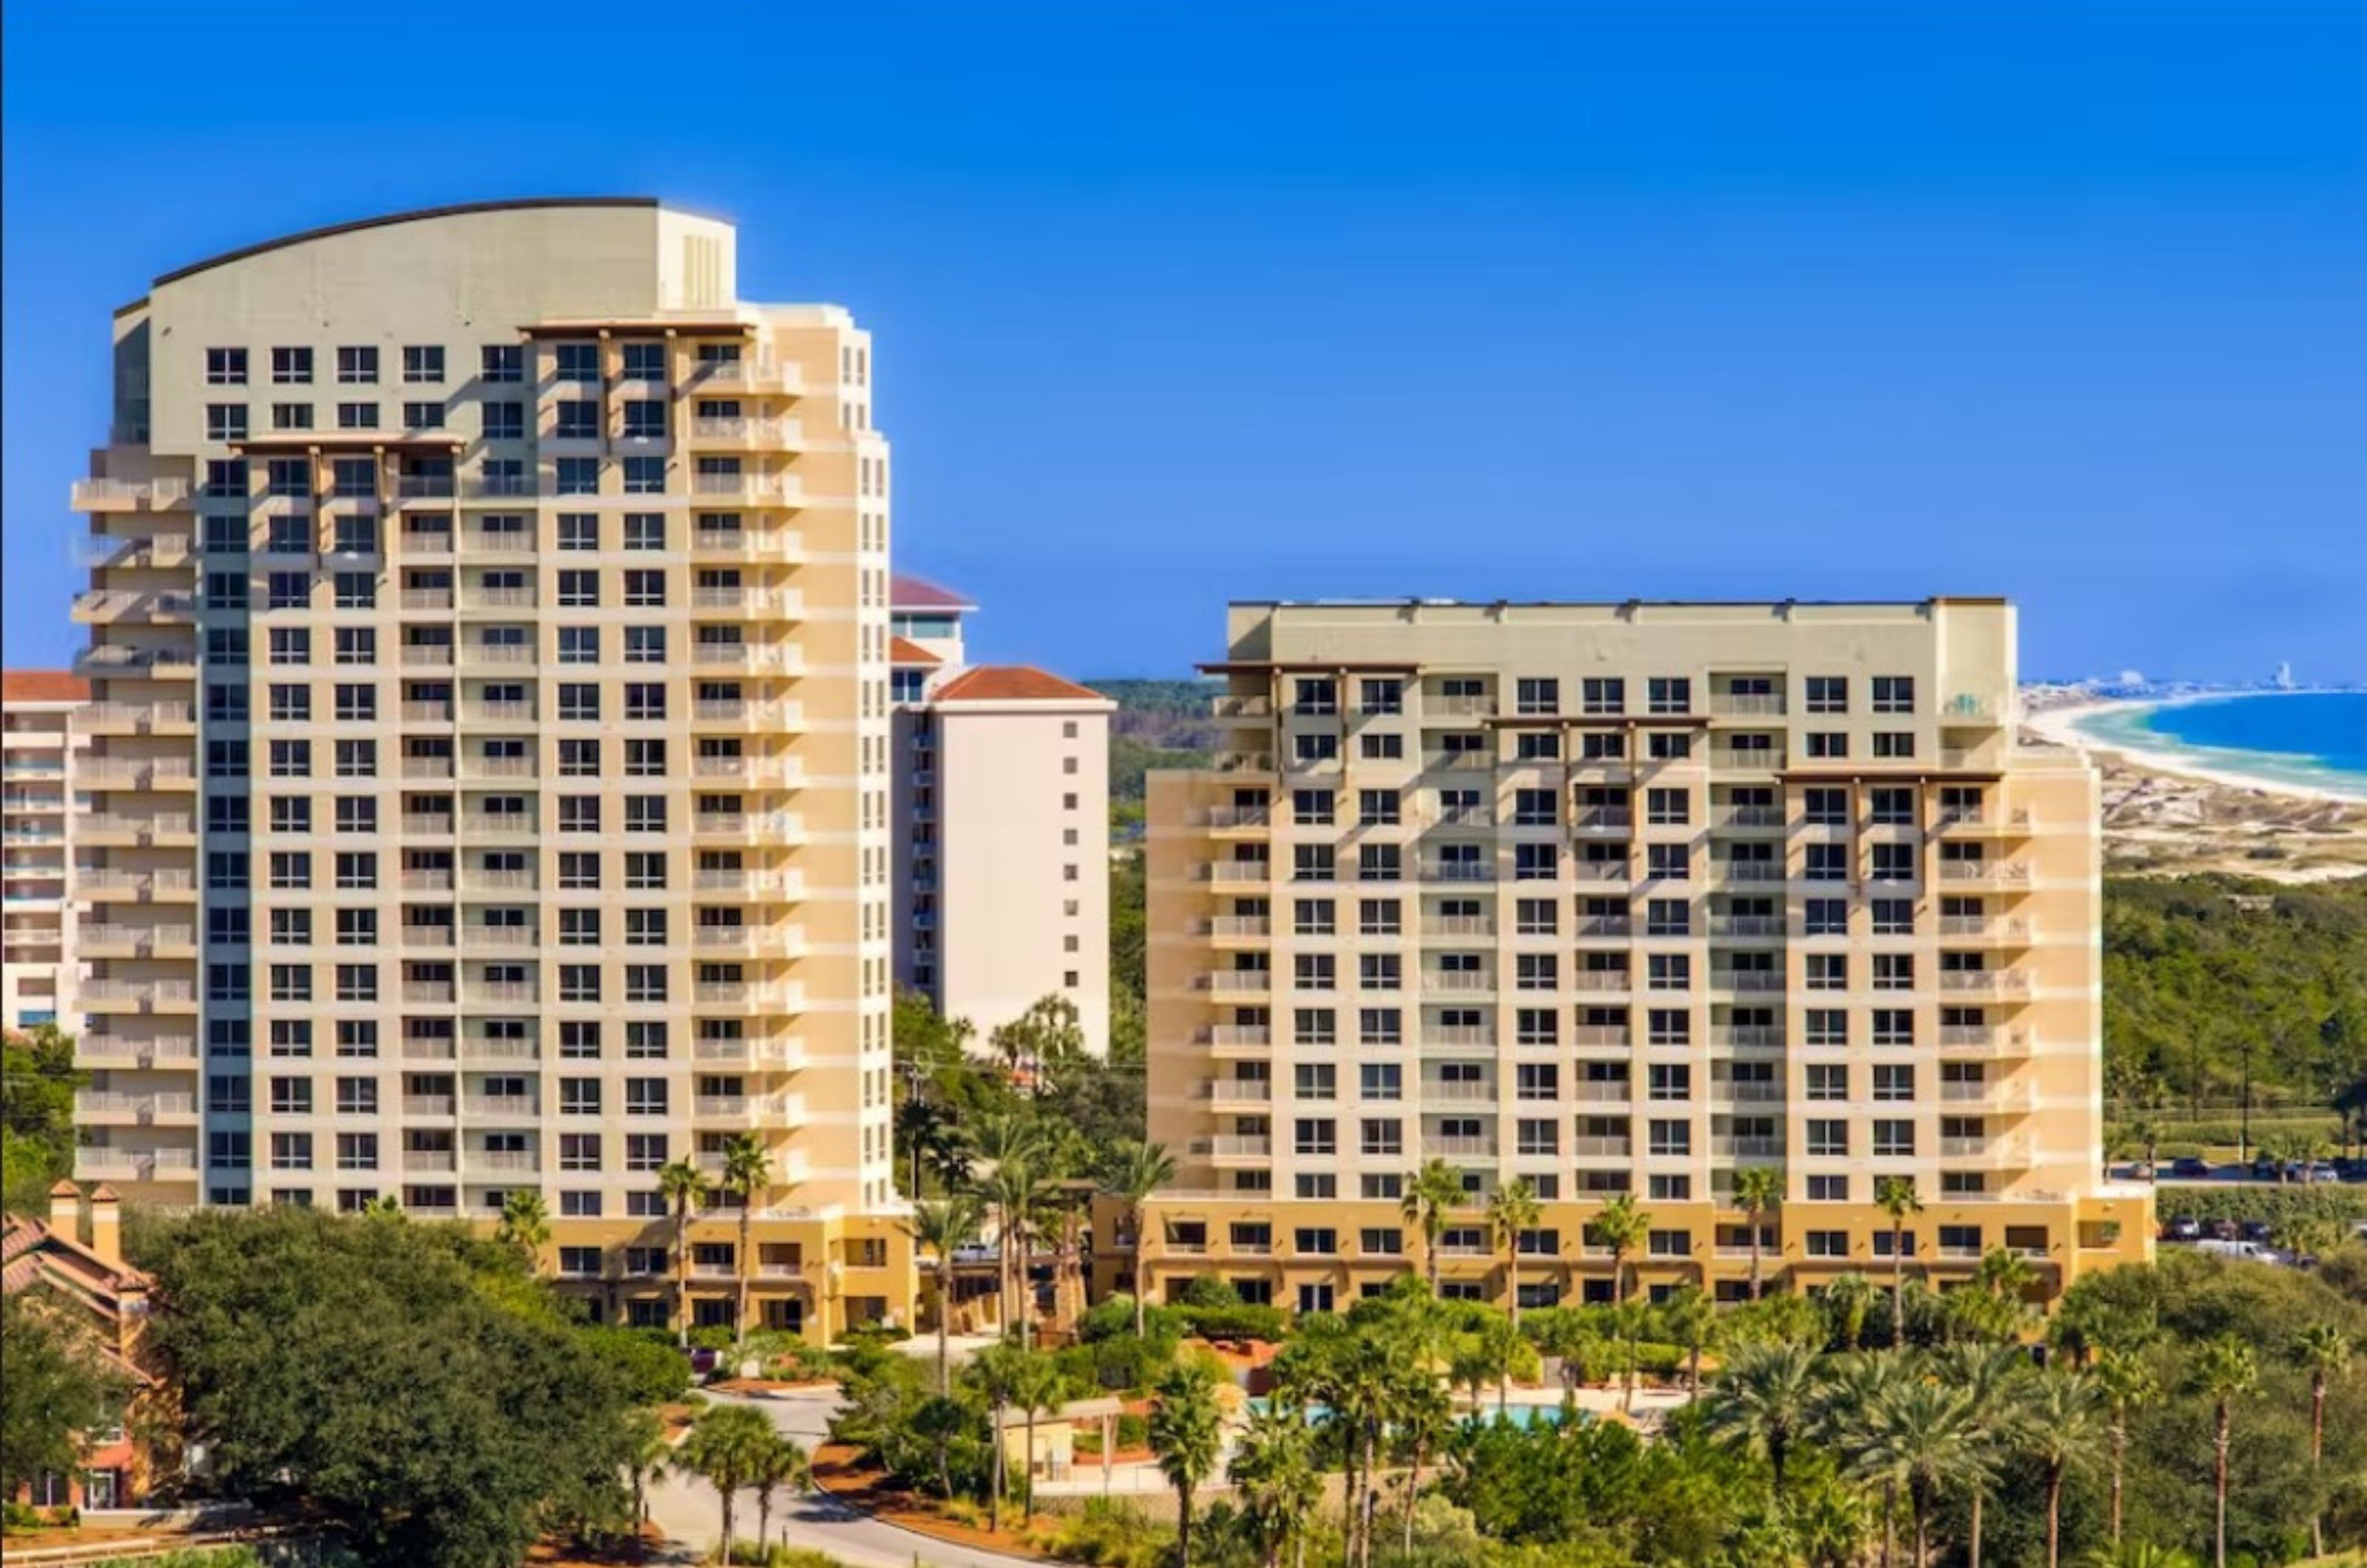 The Luau's condos feature balconies overlooking the resort pool and offering sweeping views of the Gulf beyond